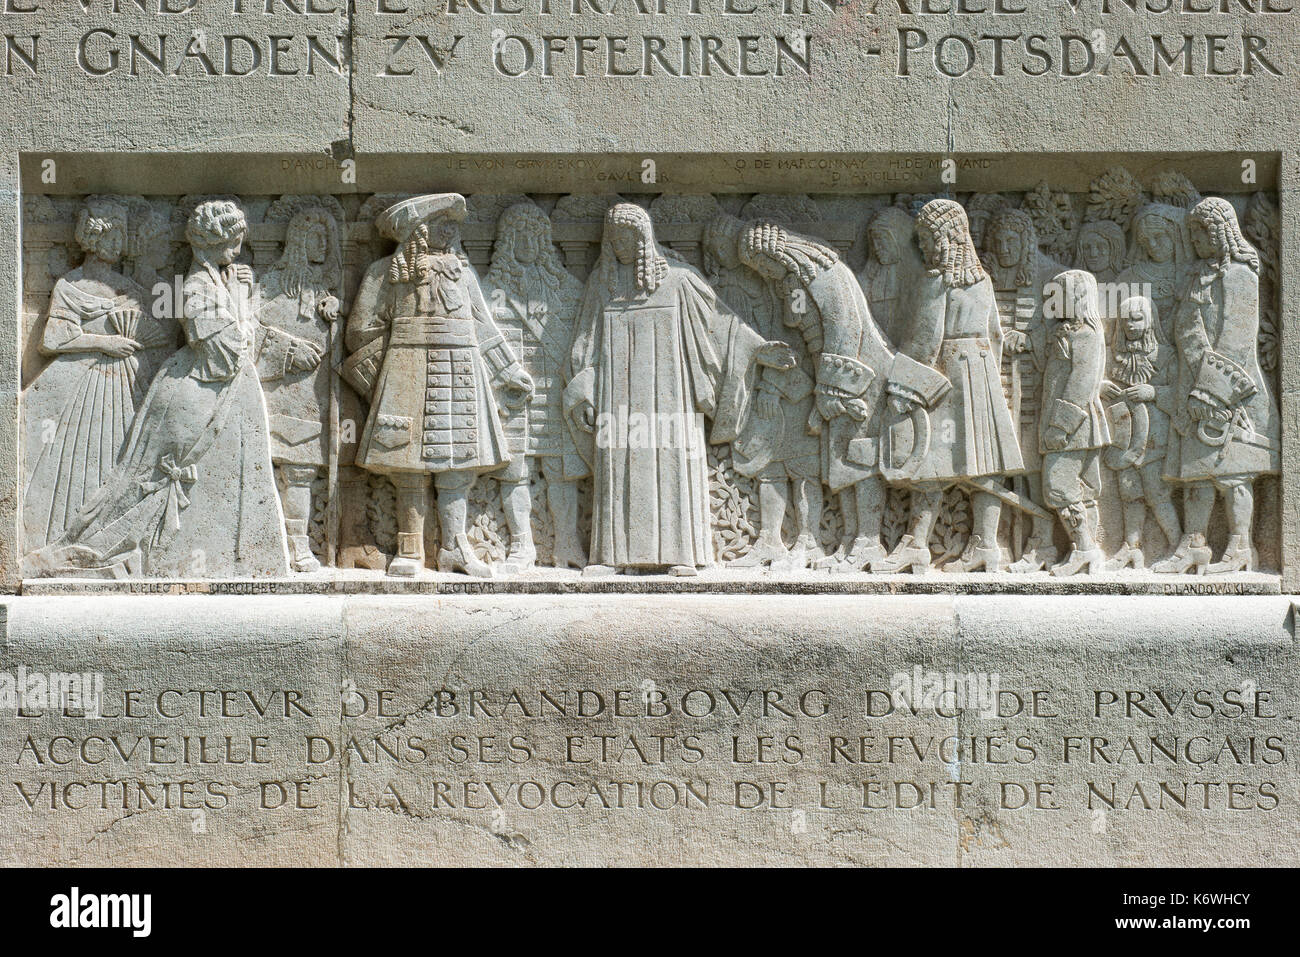 Elector Friedrich Wilhelm of Brandenburg takes up persecuted Huguenots, relief at the International Monument of the Reformation Stock Photo